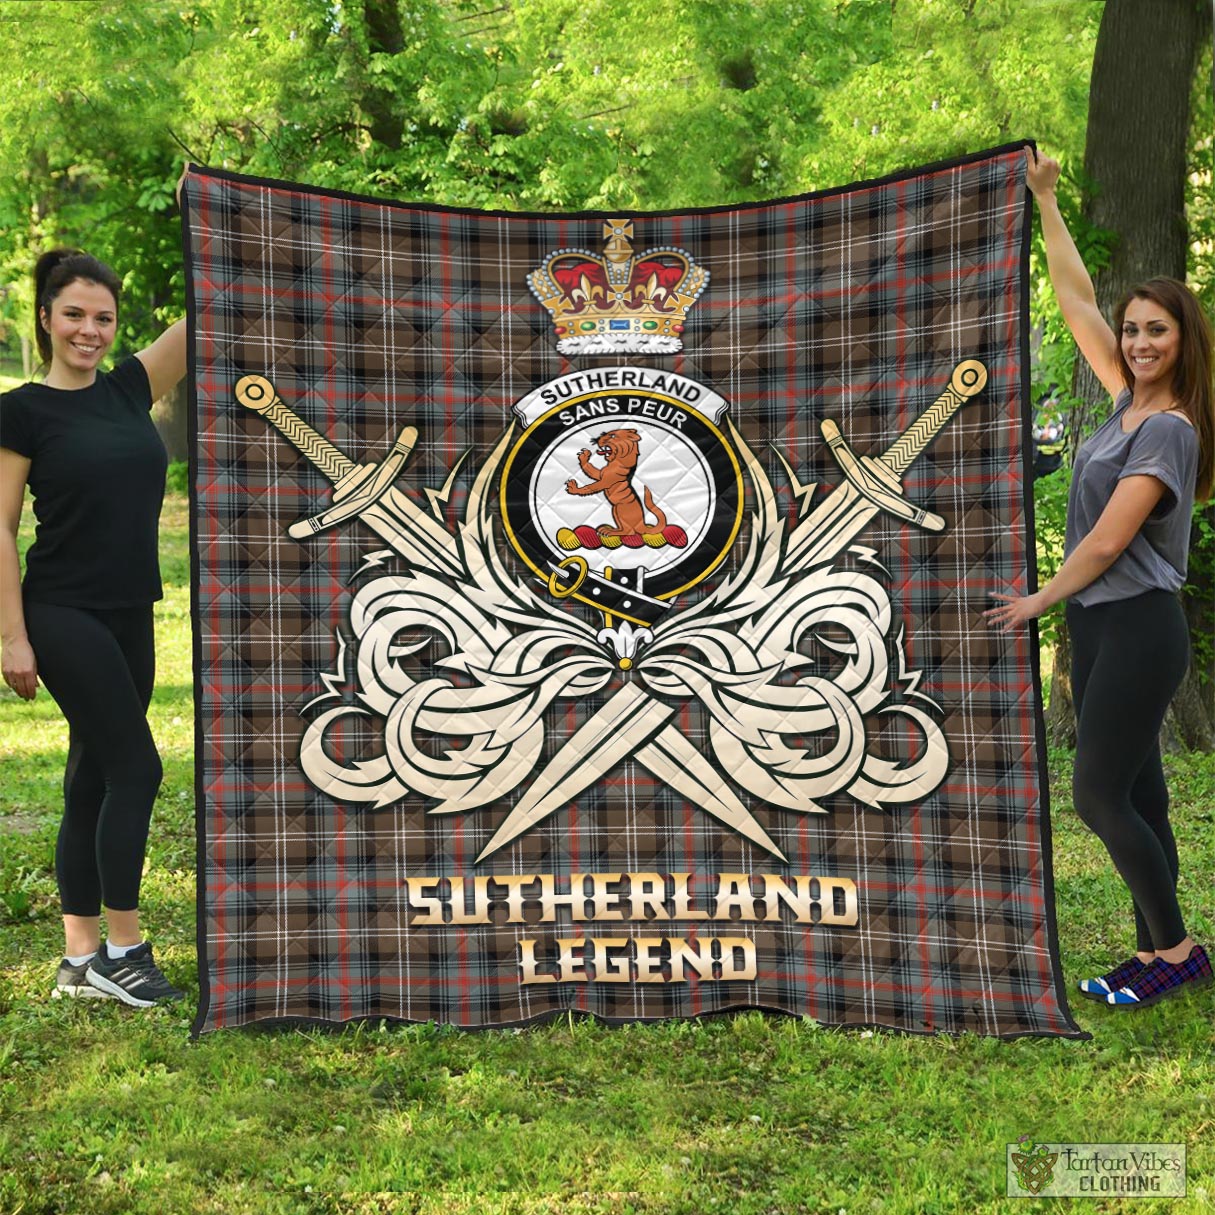 Tartan Vibes Clothing Sutherland Weathered Tartan Quilt with Clan Crest and the Golden Sword of Courageous Legacy